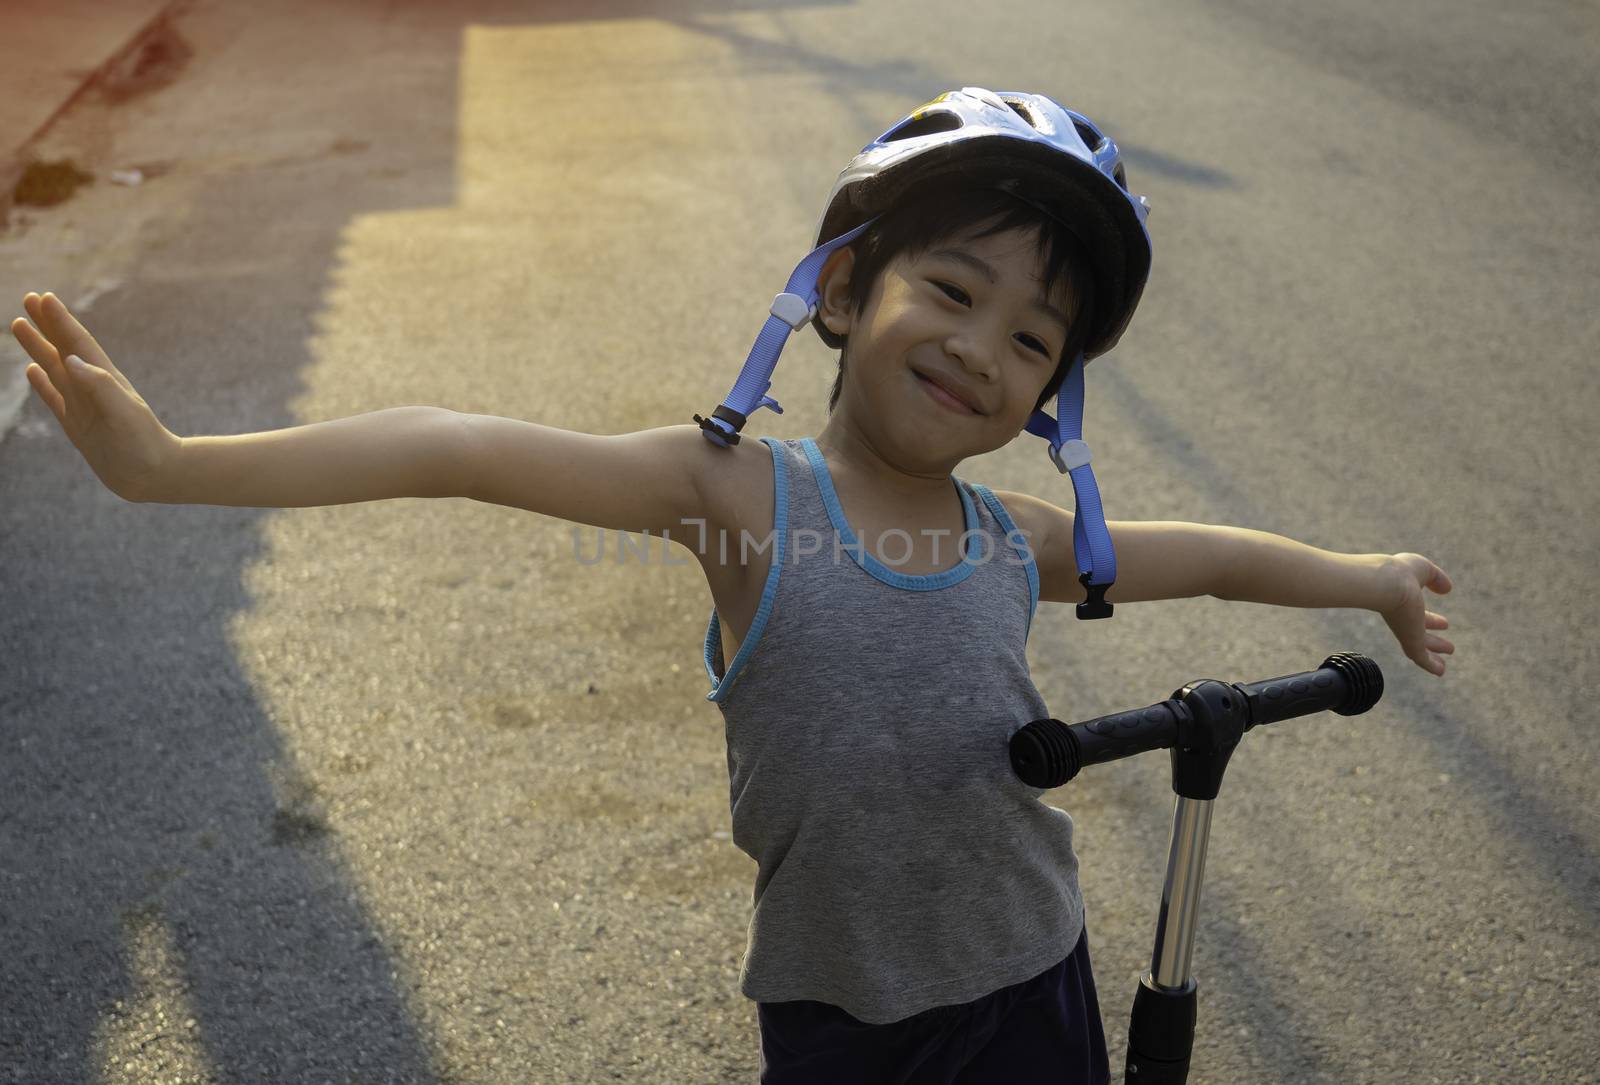 A 4-year-old Asian boy smiled happily with the opportunity to exercise by riding a scooter in the evening during the coronavirus crisis. by panyajampatong